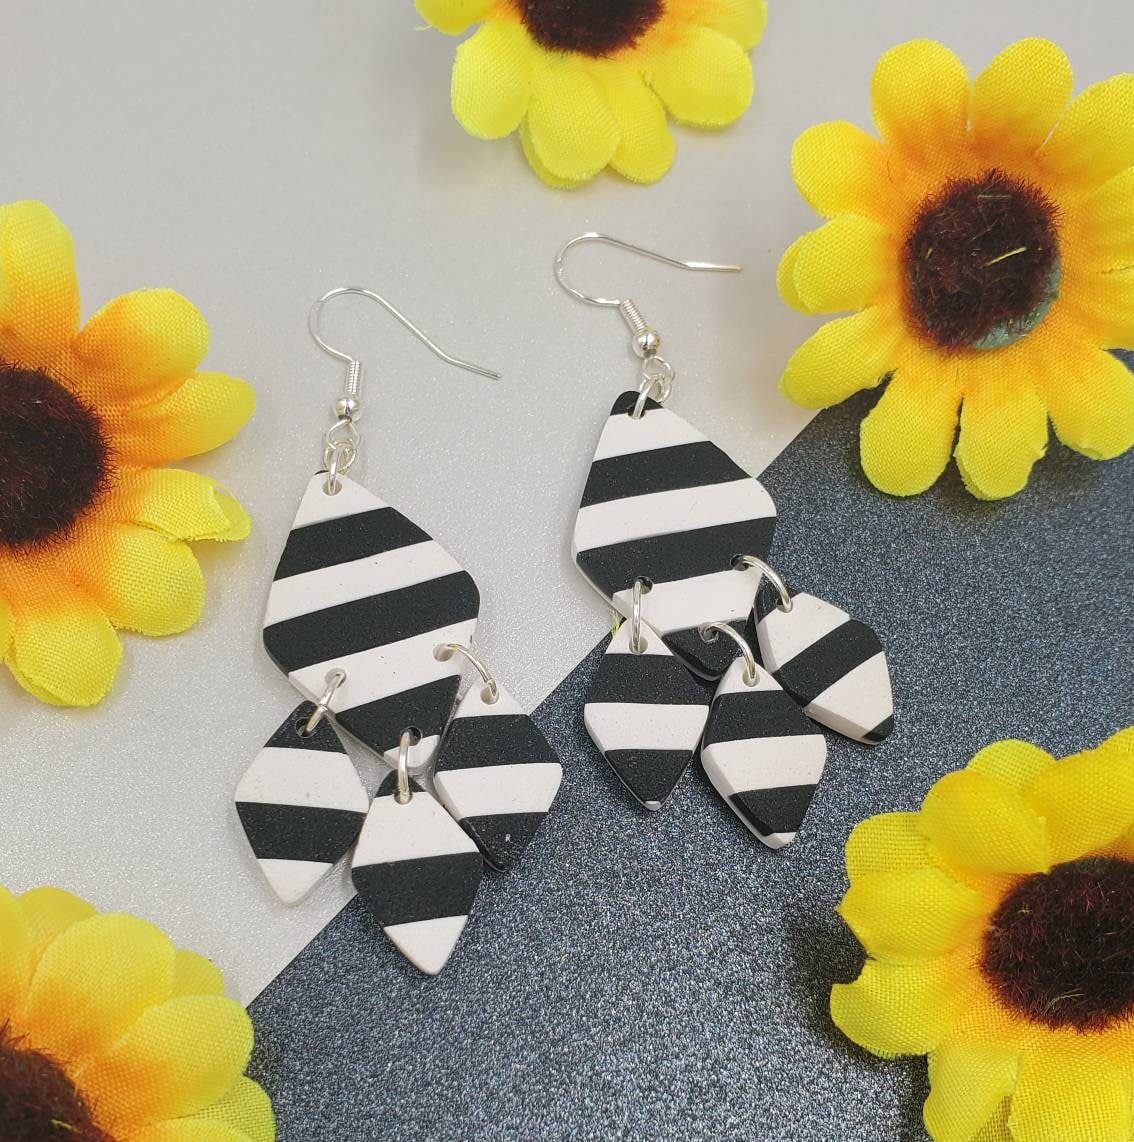 Hypoallergenic and Nickel Free Lightweight Black and White Striped Diamond-Shaped Dangles Polymer Clay Earrings